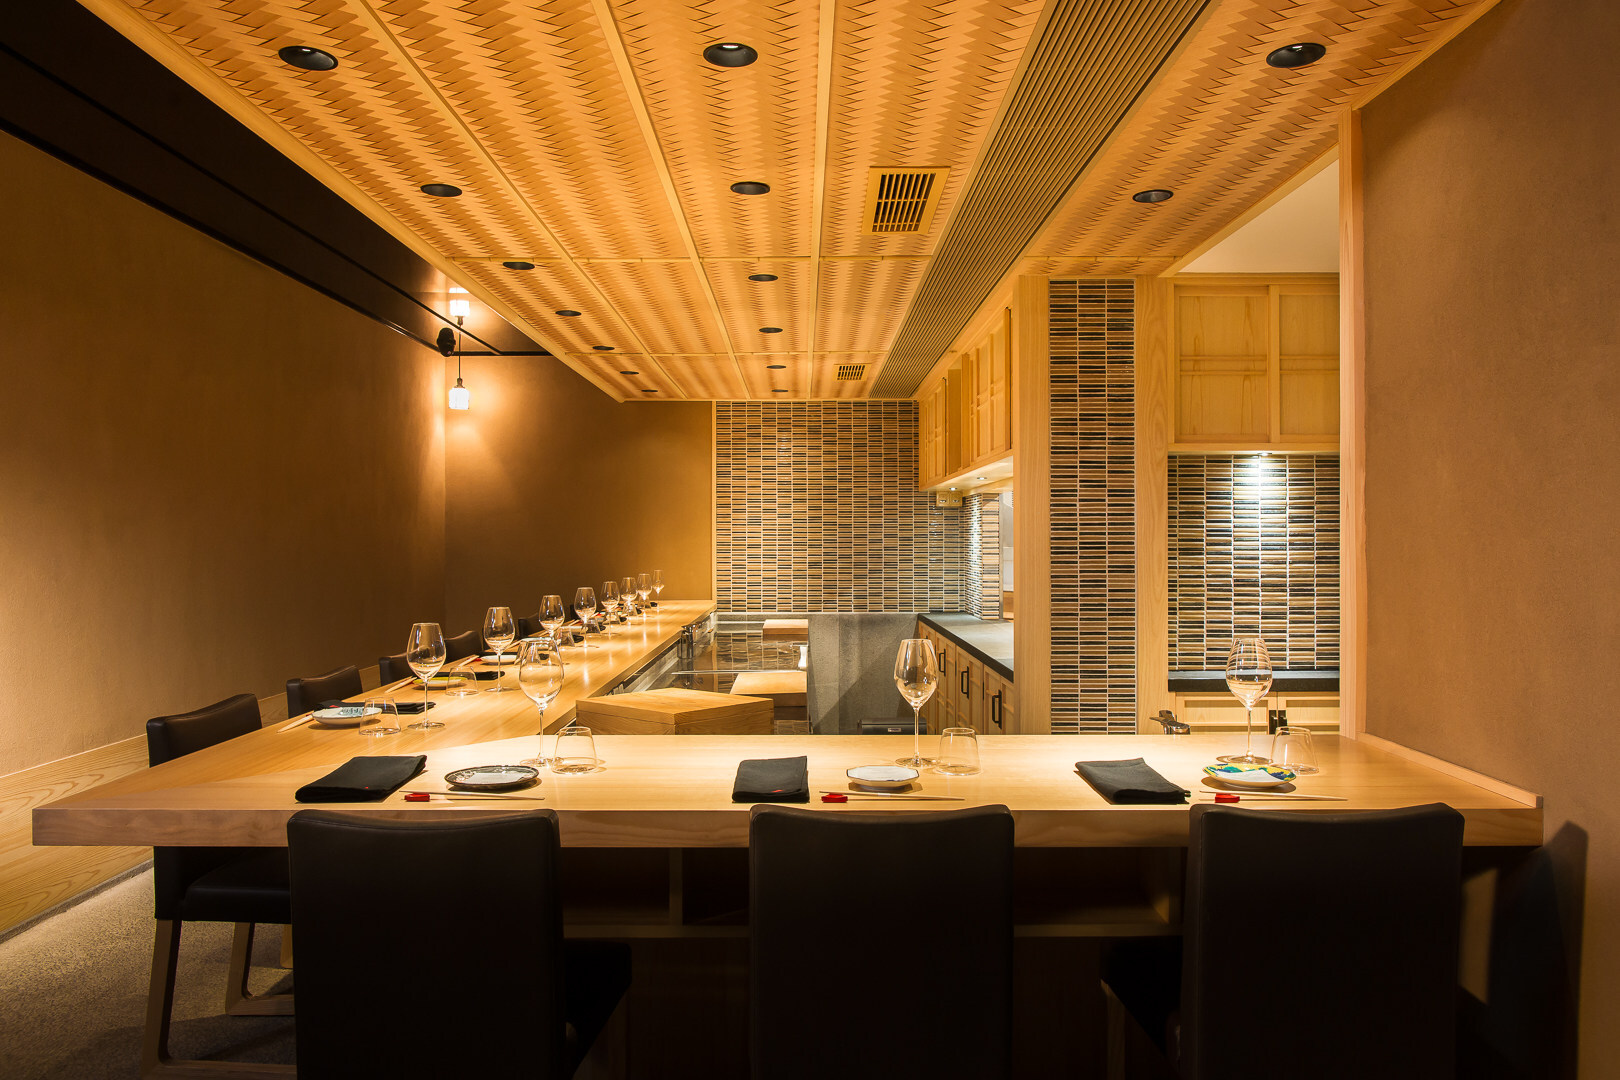 Haku’s interior is typically Japanese but chef Rob Drennan’s food draws on a whole world of influences, including from his previous posting in Portland, Oregon. Photo: Handout